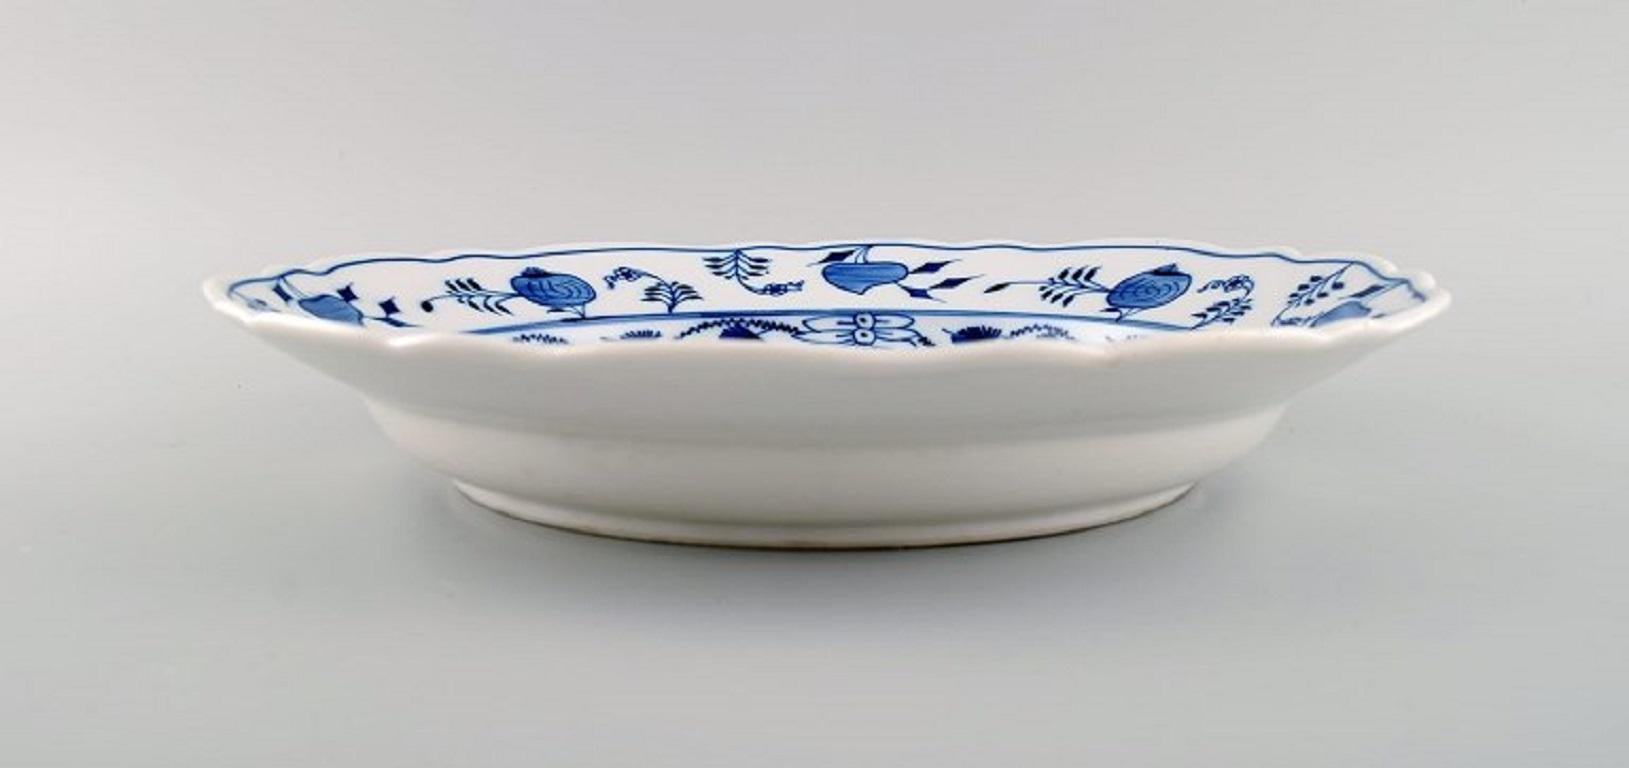 Stadt Meissen Blue Onion pattern. Large bowl. Mid-20th century.
Measures: 34.5 x 5.8 cm.
In excellent condition. Hairline crack.
Stamped.